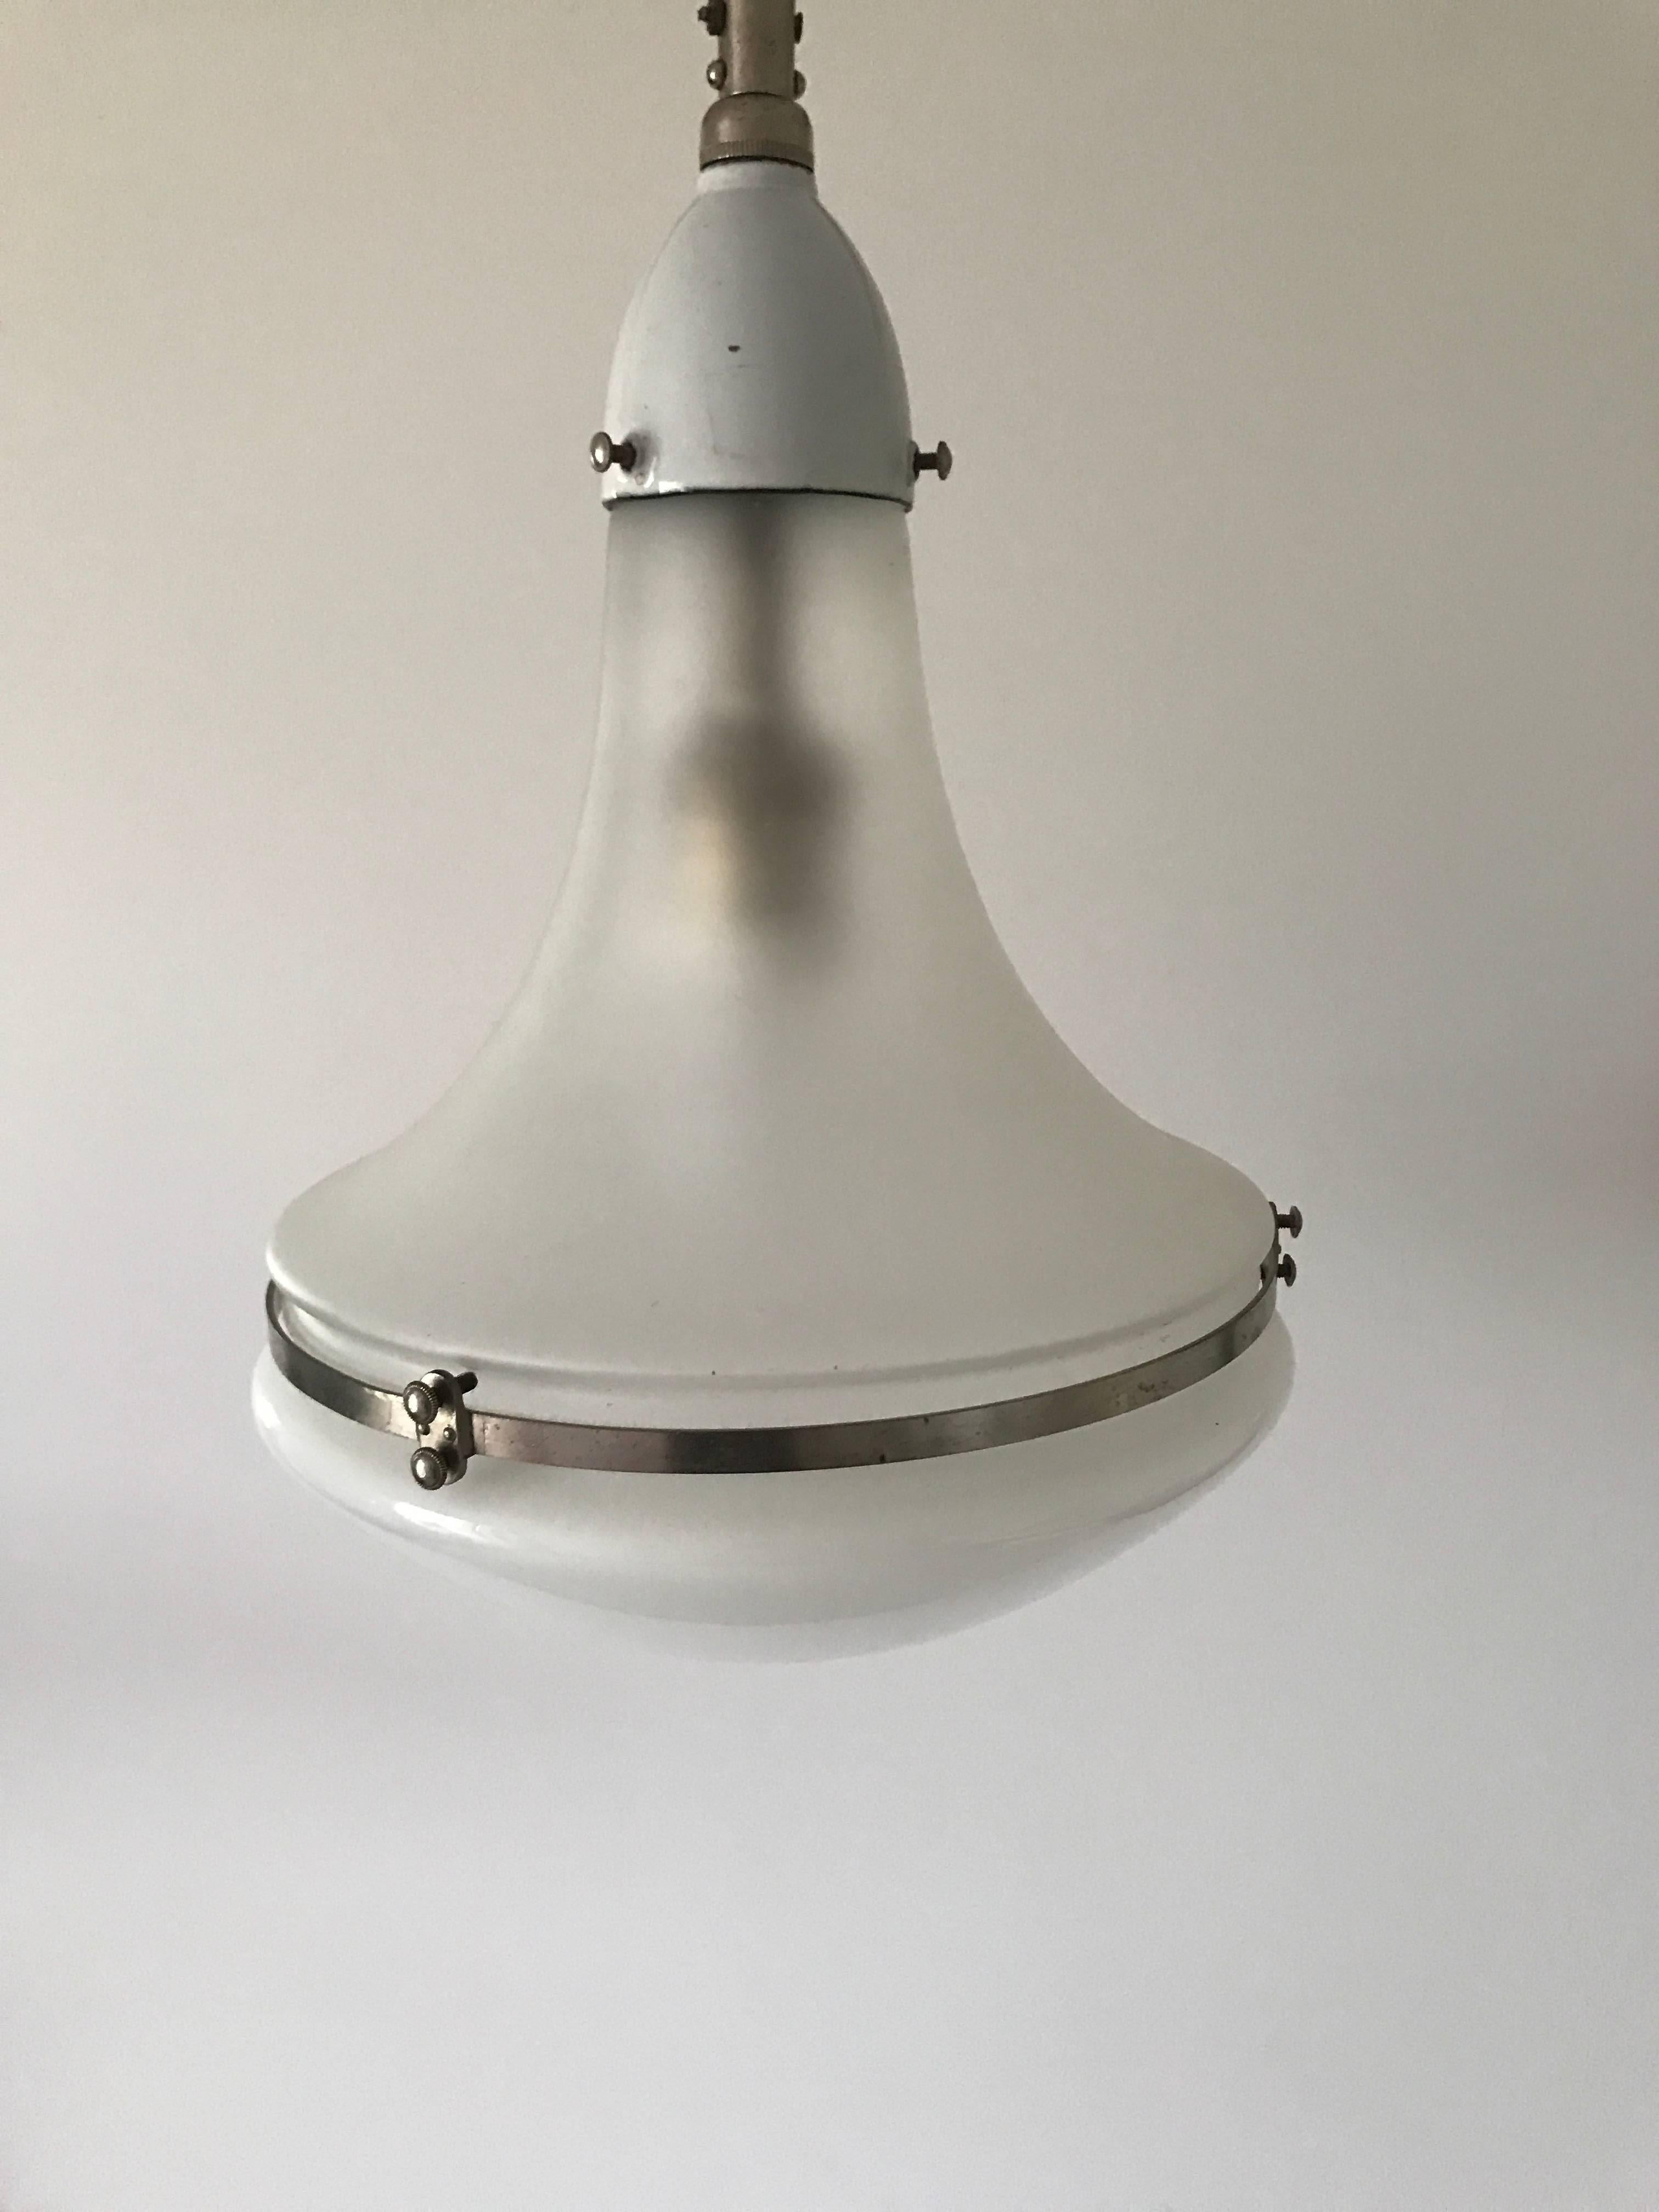 1925 rare white enamel Peter Behrens Luzette lamp small model.
This lamp is of the rare kind with white enamel on the tube and on the top mounts. The top of the shade is frosted and the bottom is opal white.
The lamp comes with new wiring and is